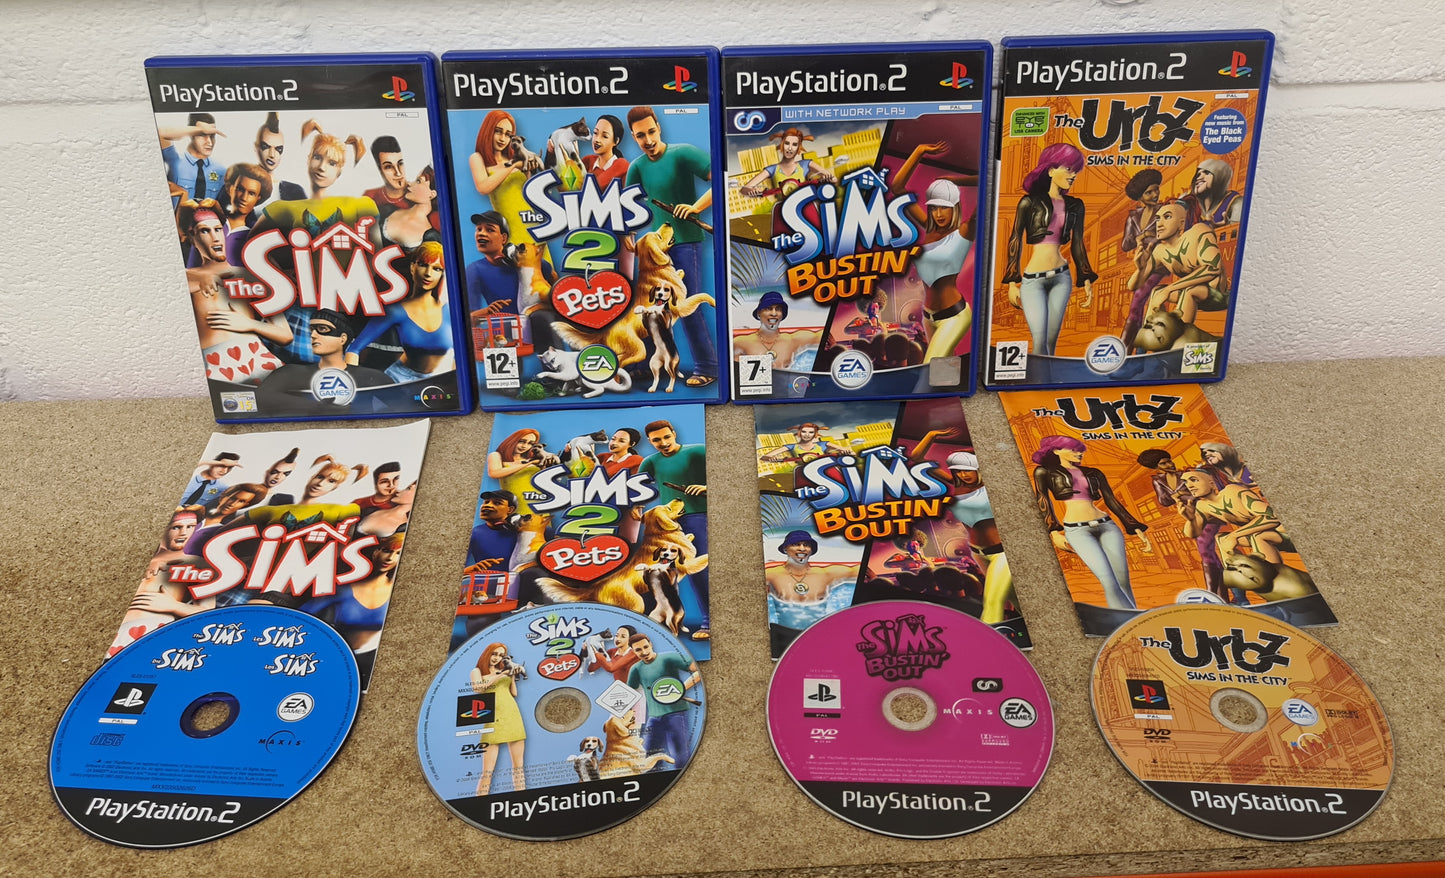 The Sims X 4 Sony Playstation 2 (PS2) Game Bundle